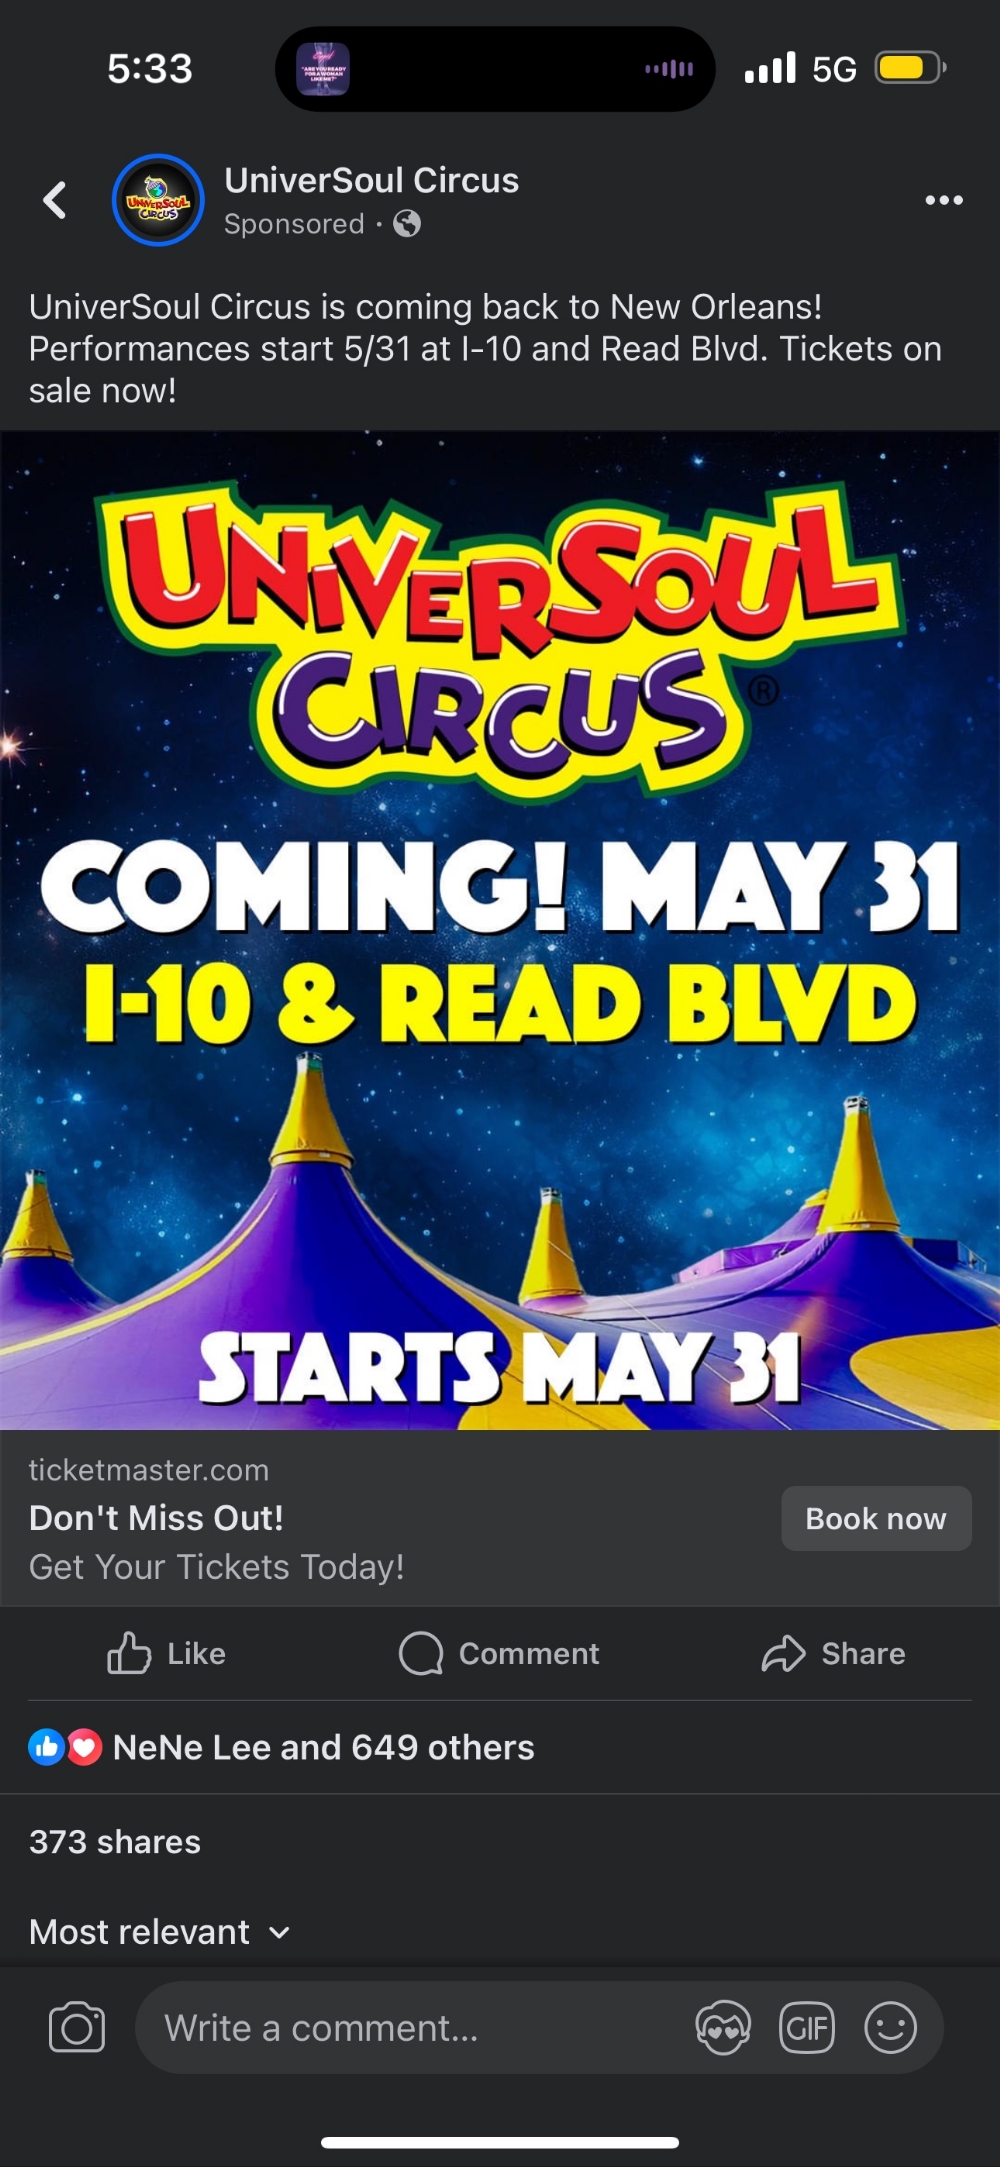 UniverSoul Circus Come To New Orleans